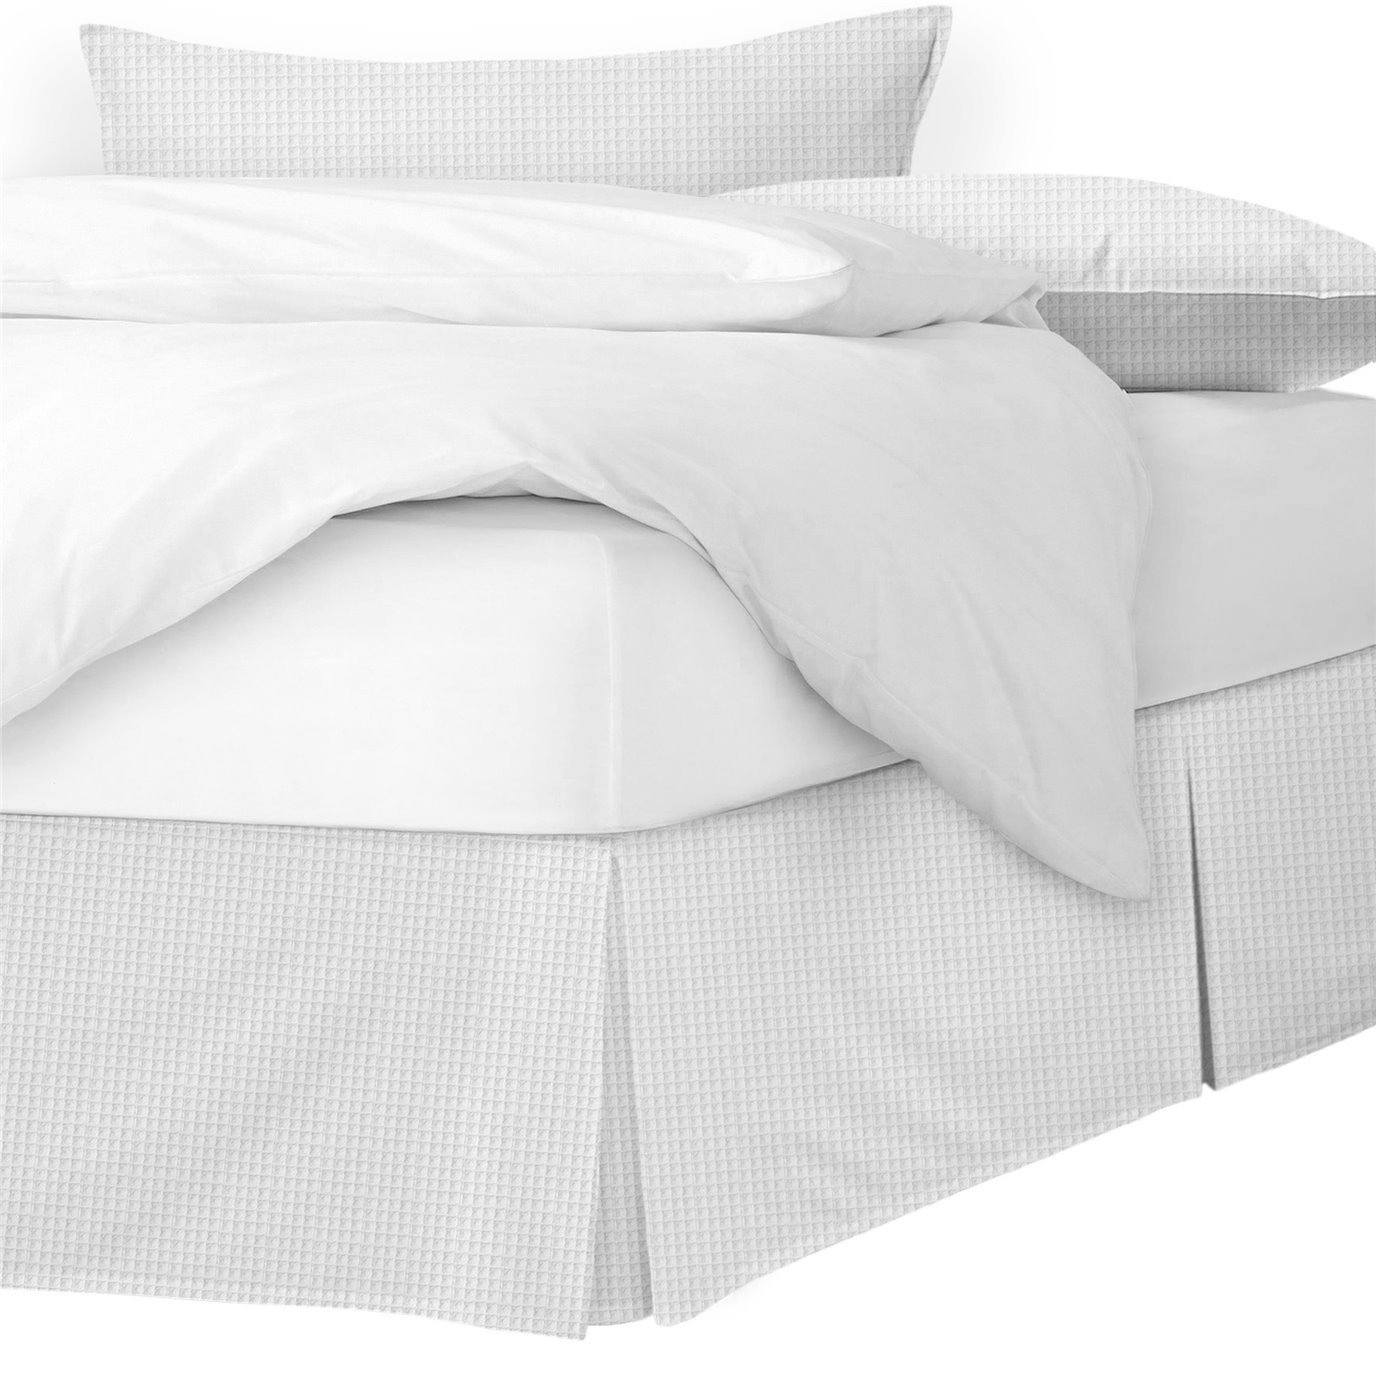 Classic Waffle White Platform Bed Skirt - Size King 18" Drop